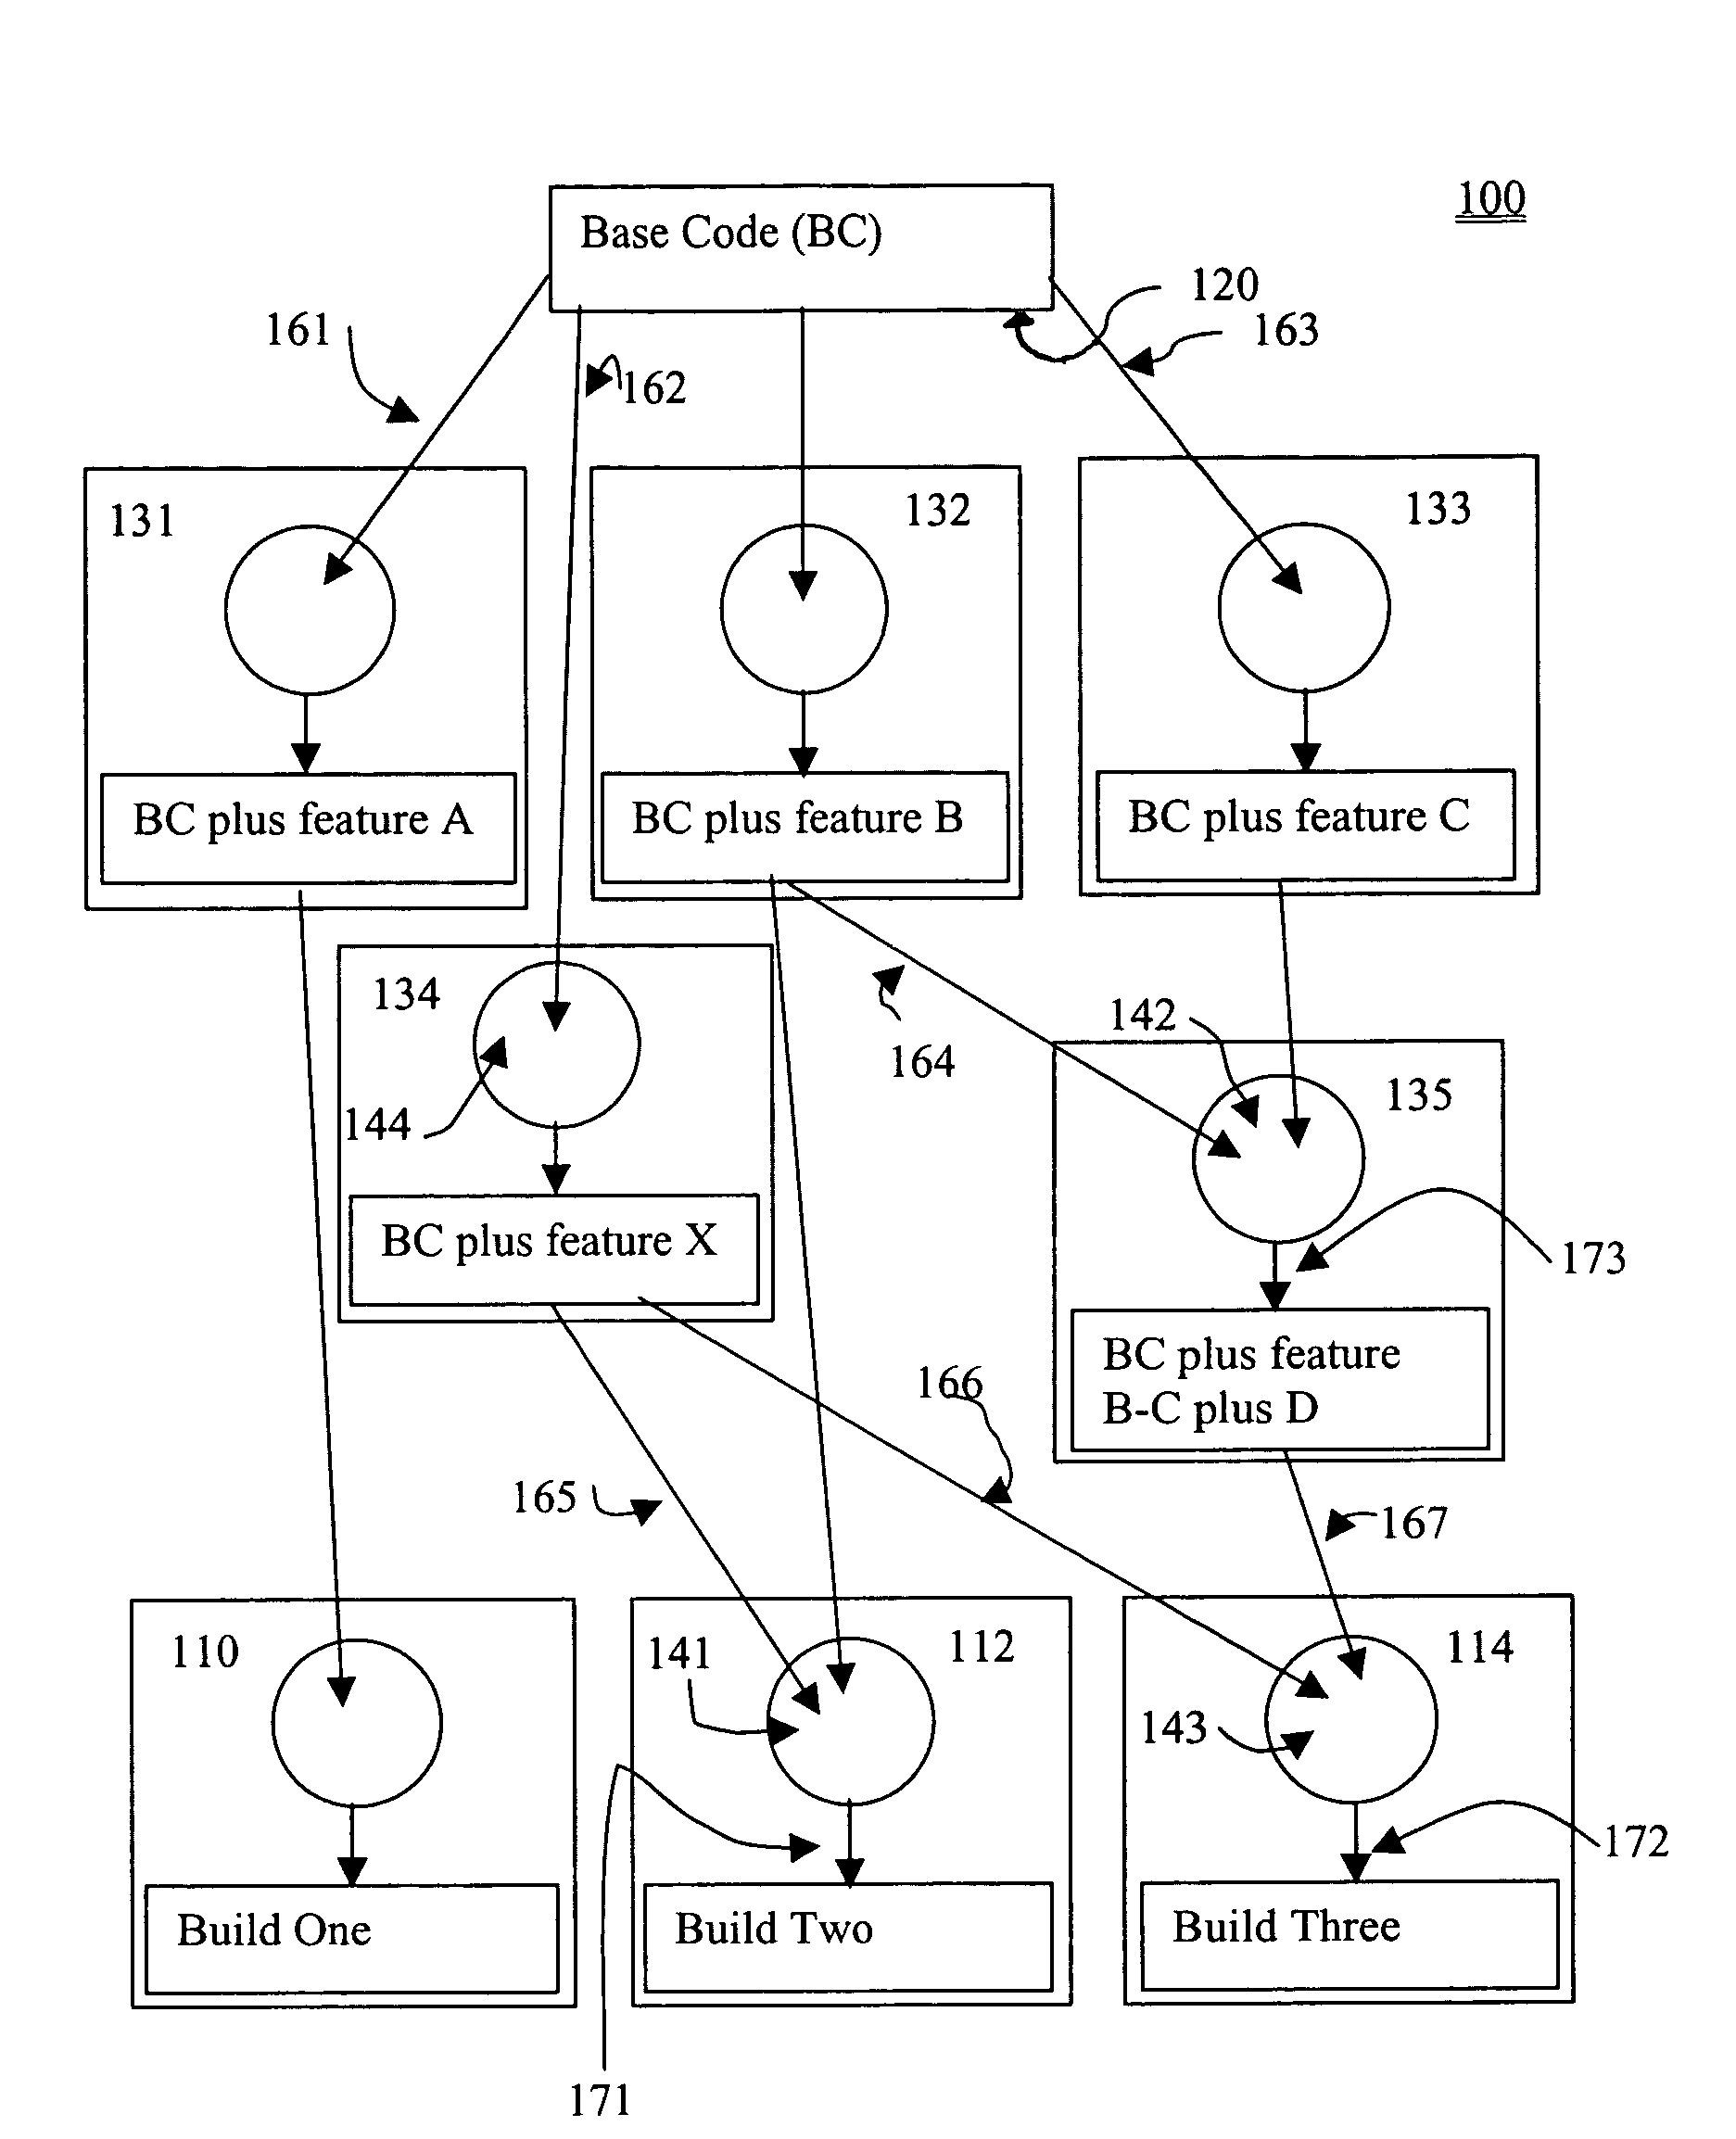 Systems and methods for generating software and hardware builds